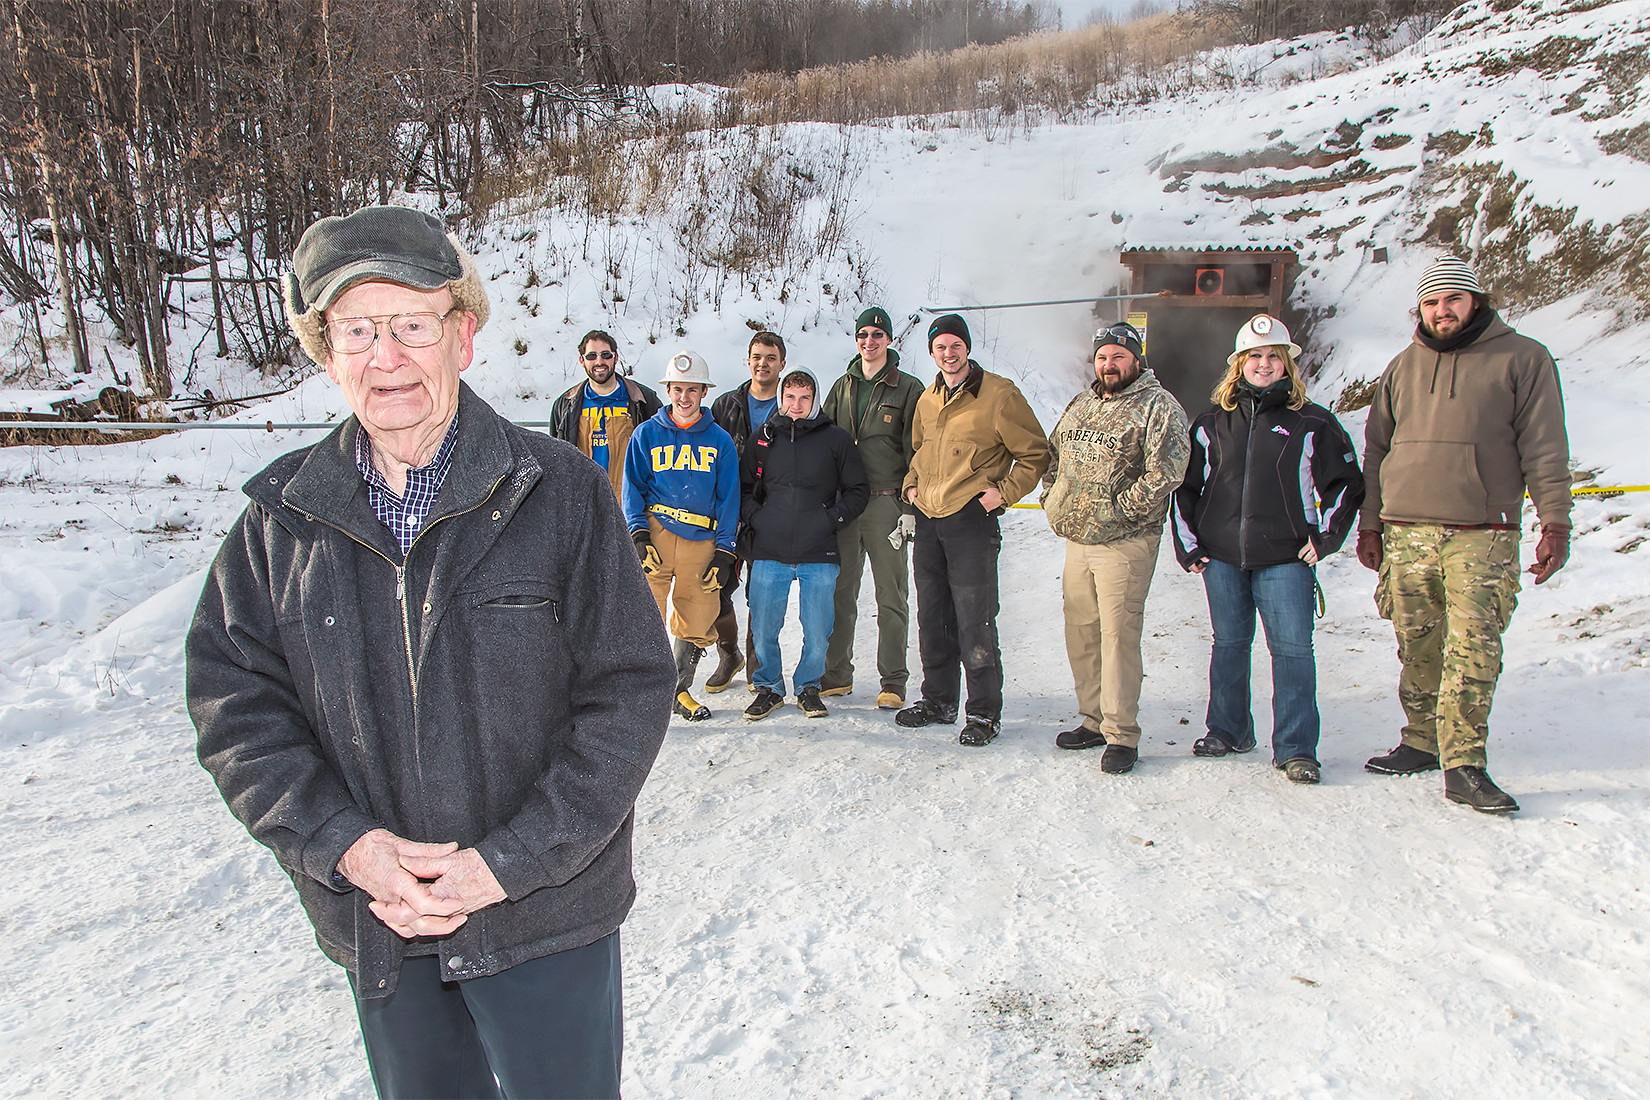 Garth Anderson joins mining students who were restarting work at the Silver Fox Mine in 2014. Anderson’s father, Tury, staked the claims after World War II and donated them to UAF in 1977. The mine is located off the Elliott Highway near its intersection with Old Murphy Dome Road. Students are in charge of the mine, which gives them real-life experience with the challenges in running a safe, efficient operation. UAF photo by Todd Paris